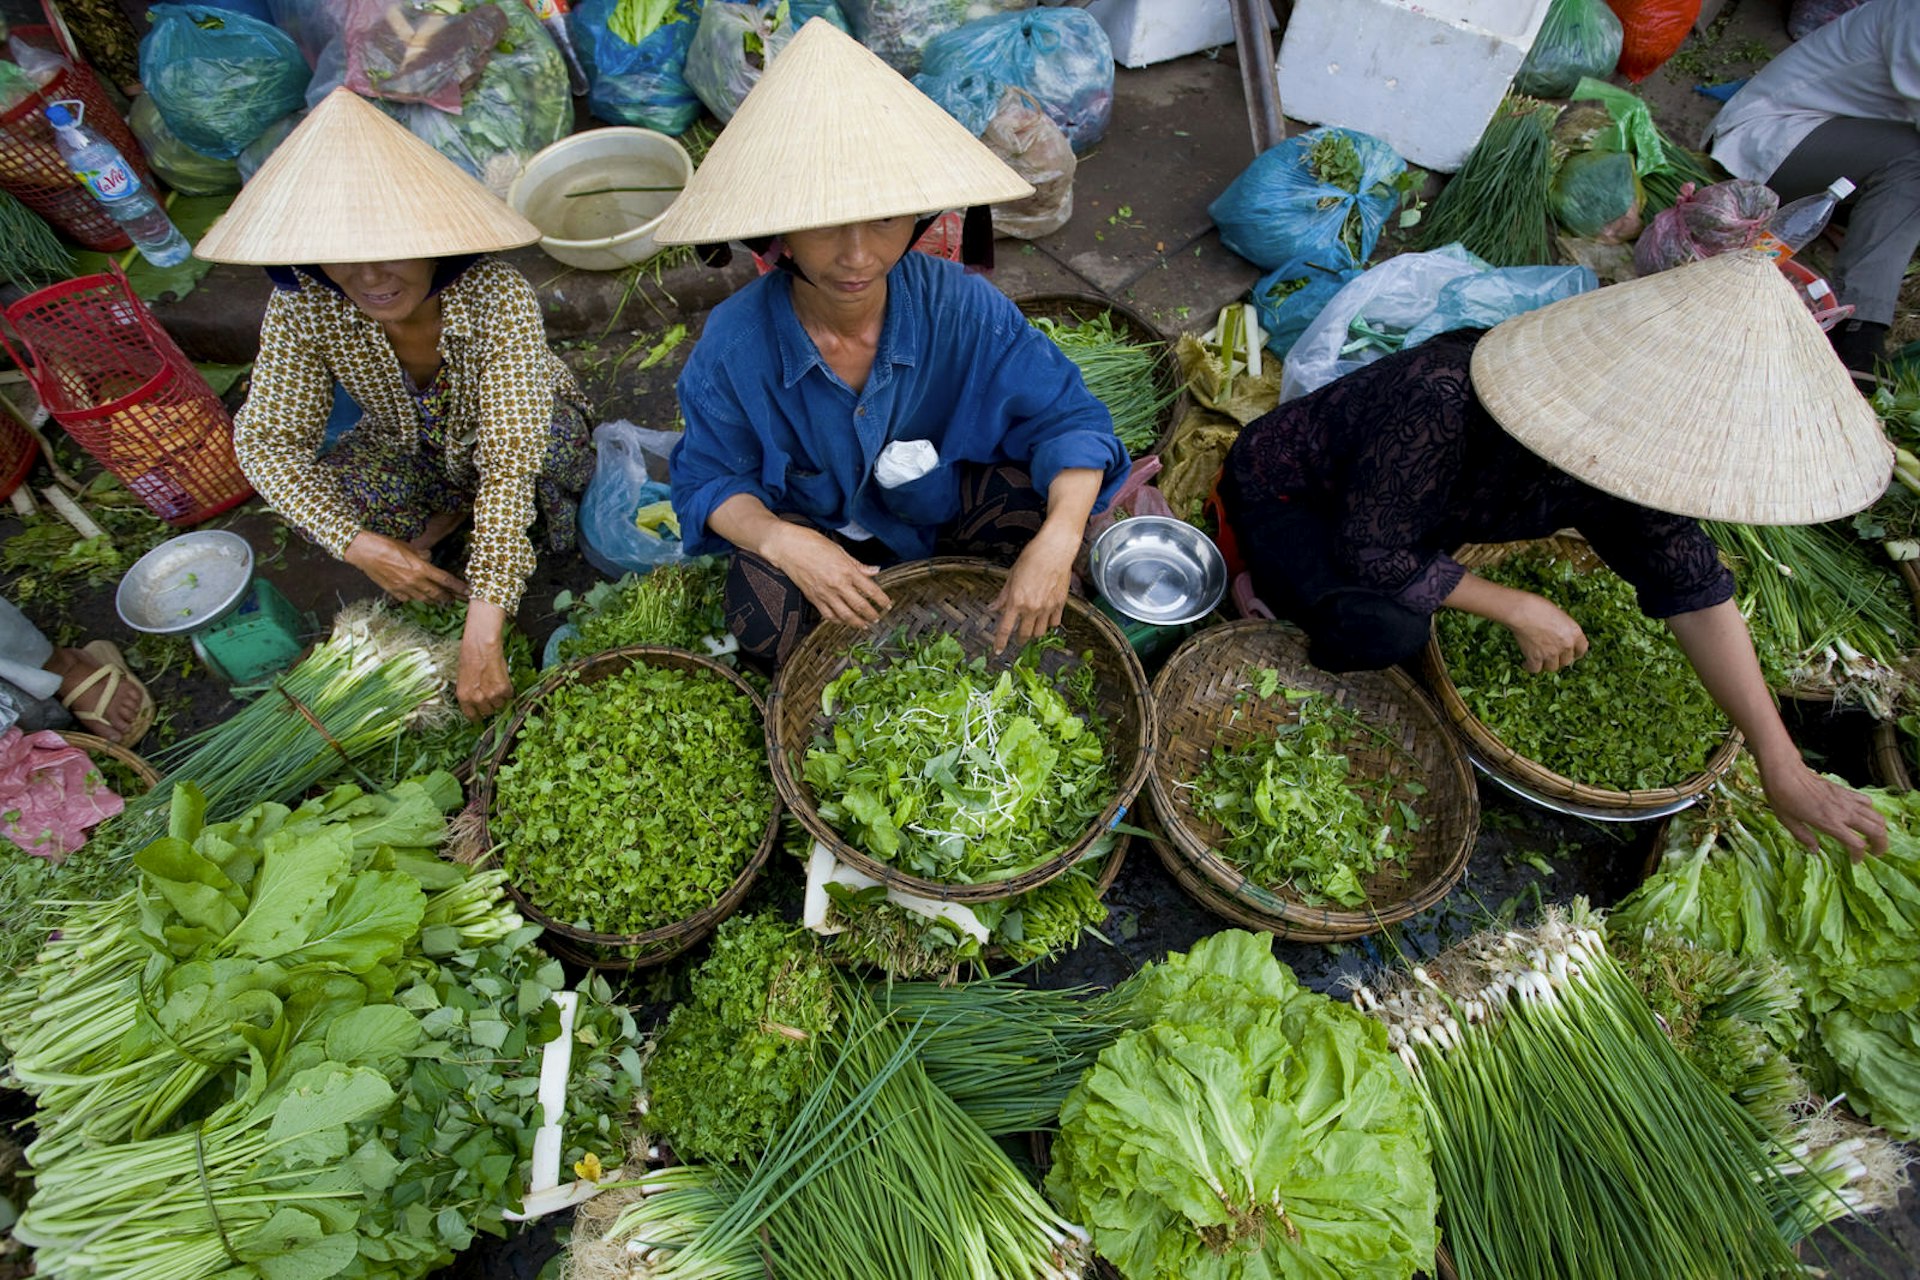 Women selling fresh produce at Central Market.